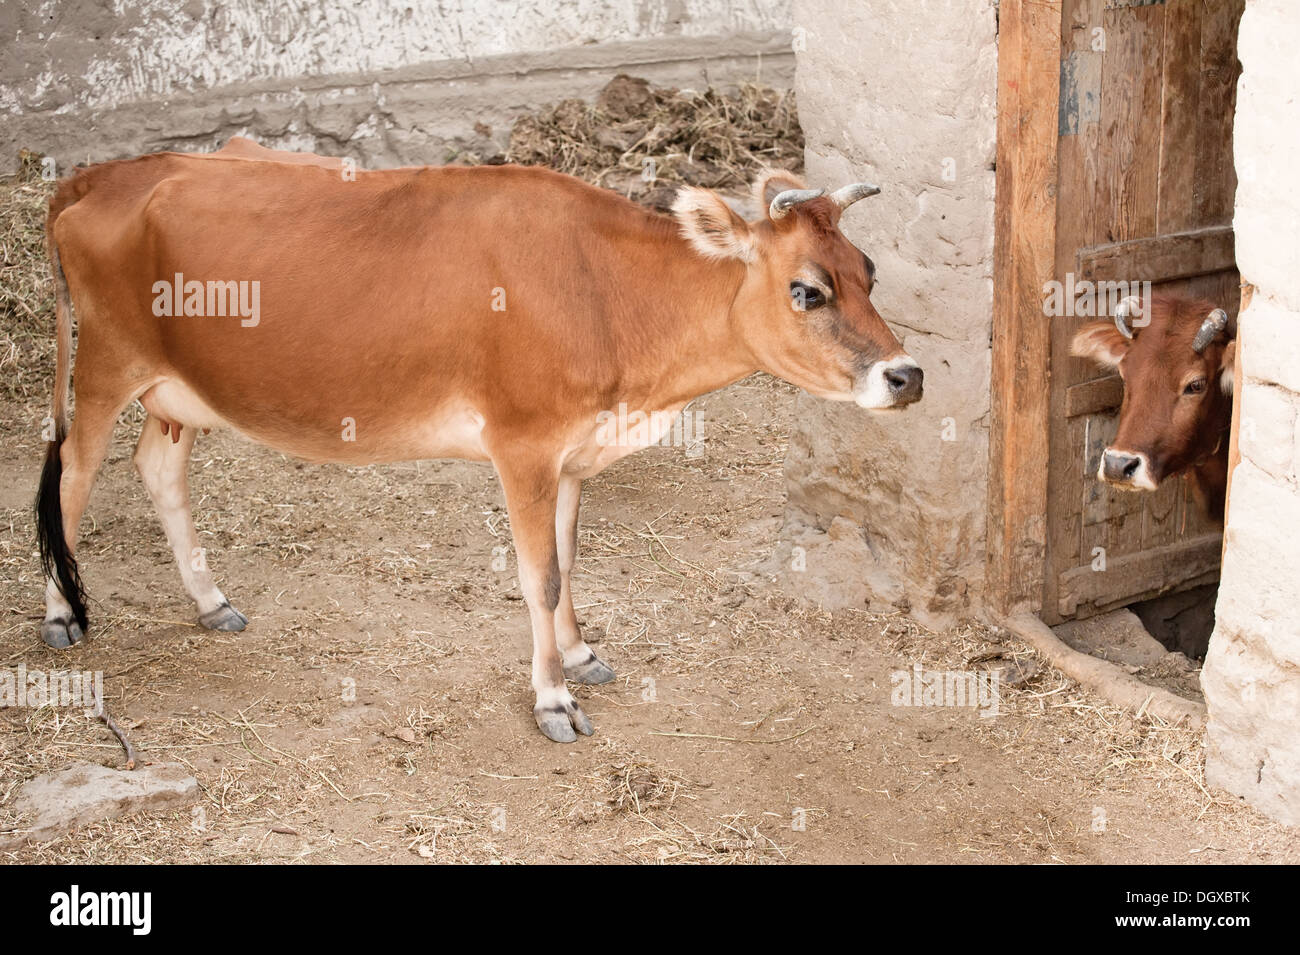 Farm animal. Two domestic cow in a stable. India Stock Photo